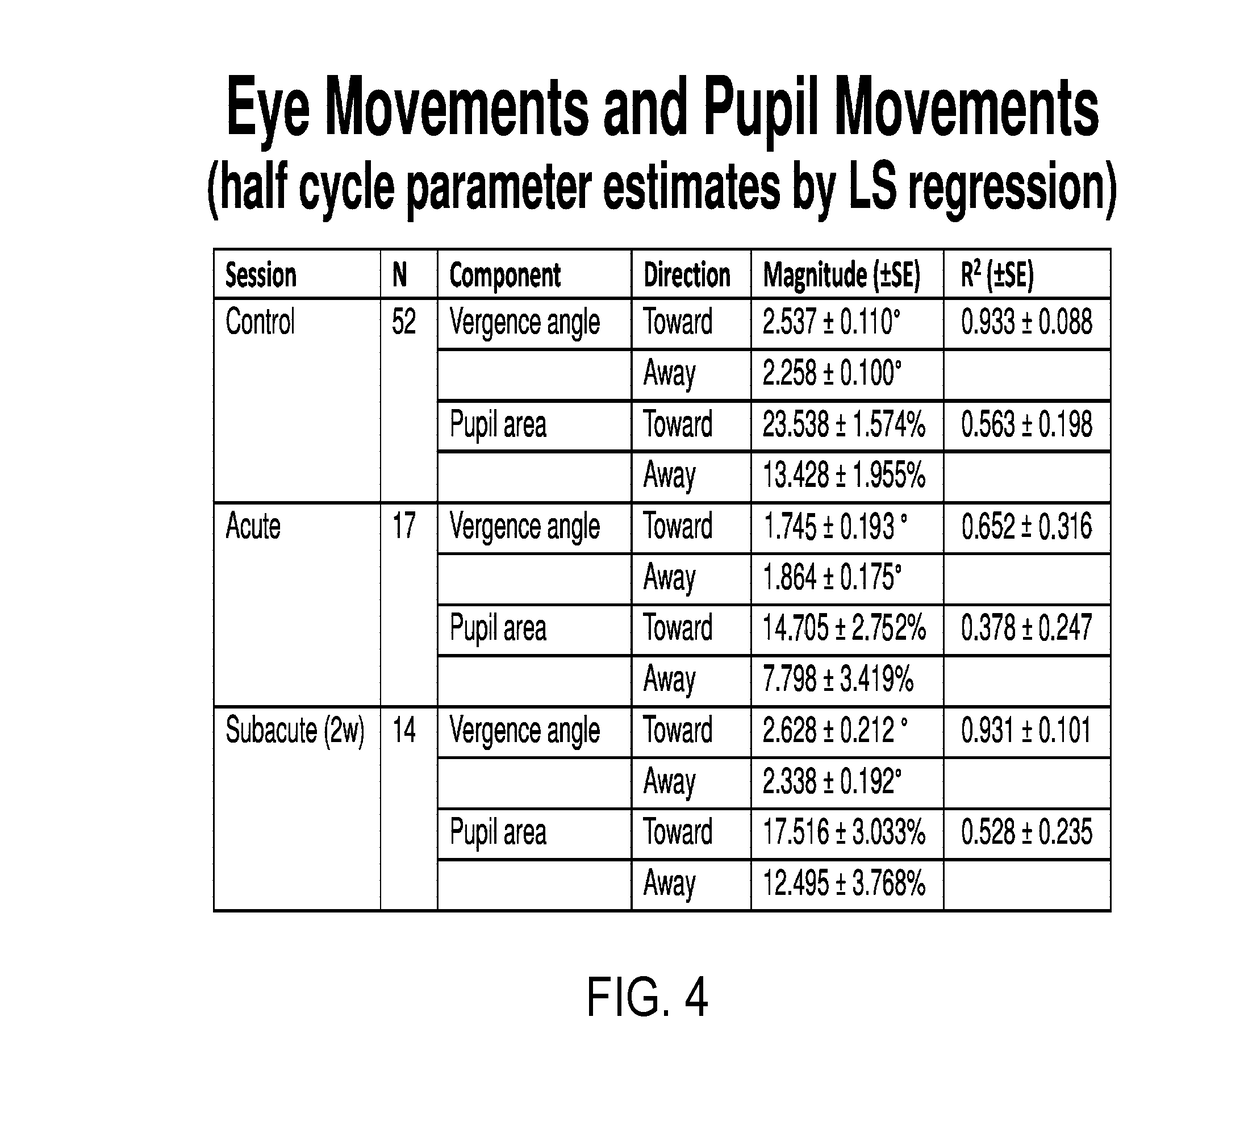 Method and Apparatus for mTBI Diagnosis Implementing Eye Movement and Pupil Movement Analysis in Objective Vergence Testing